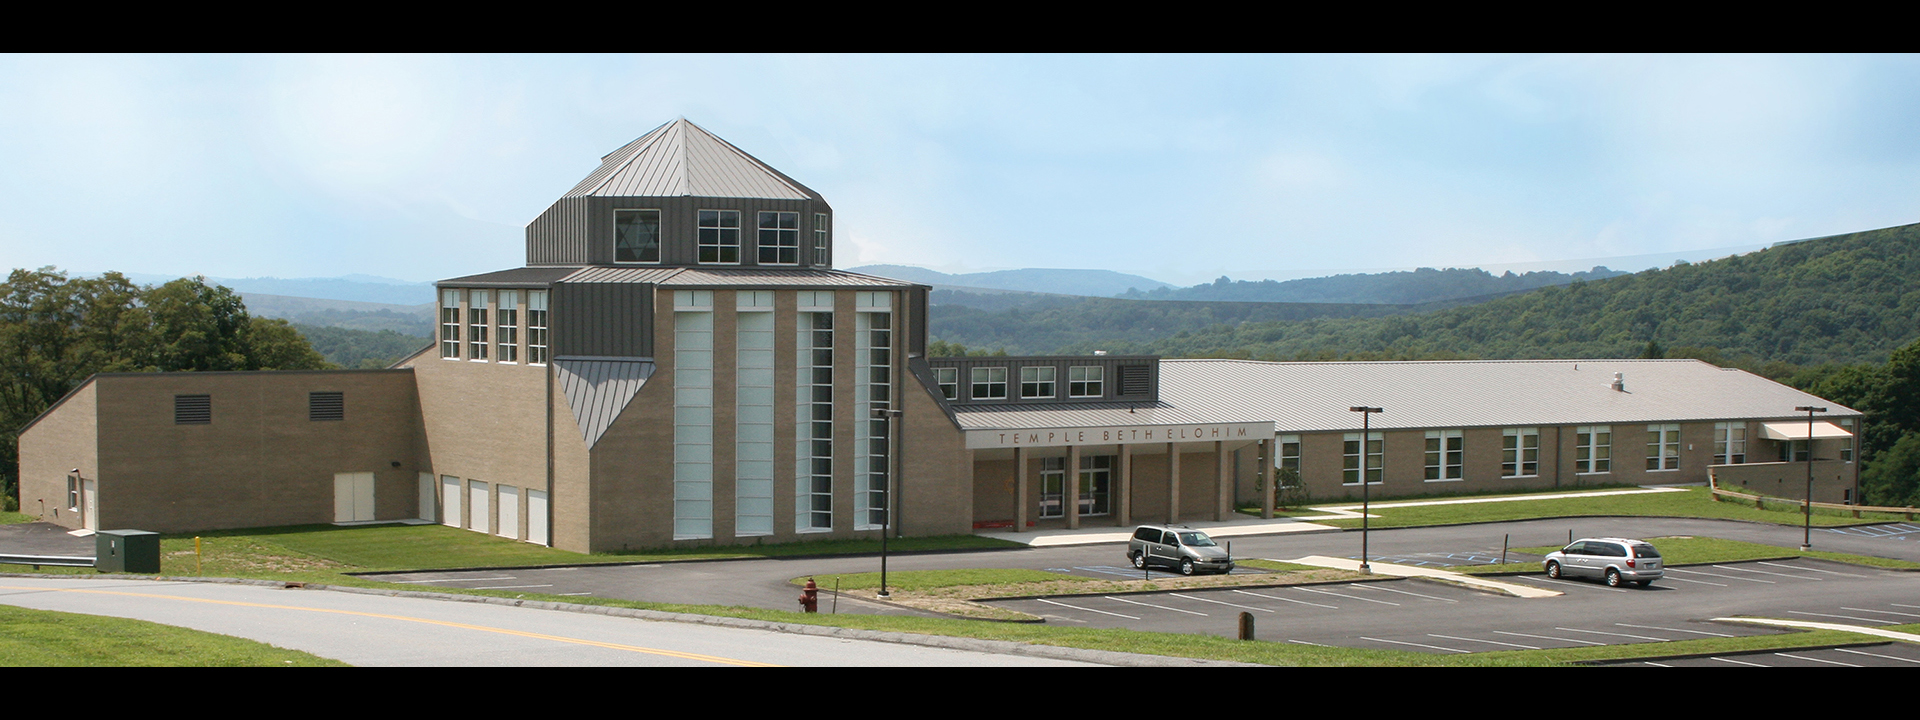 Built by Sisca: Temple Beth Elohim, Brewster, NY